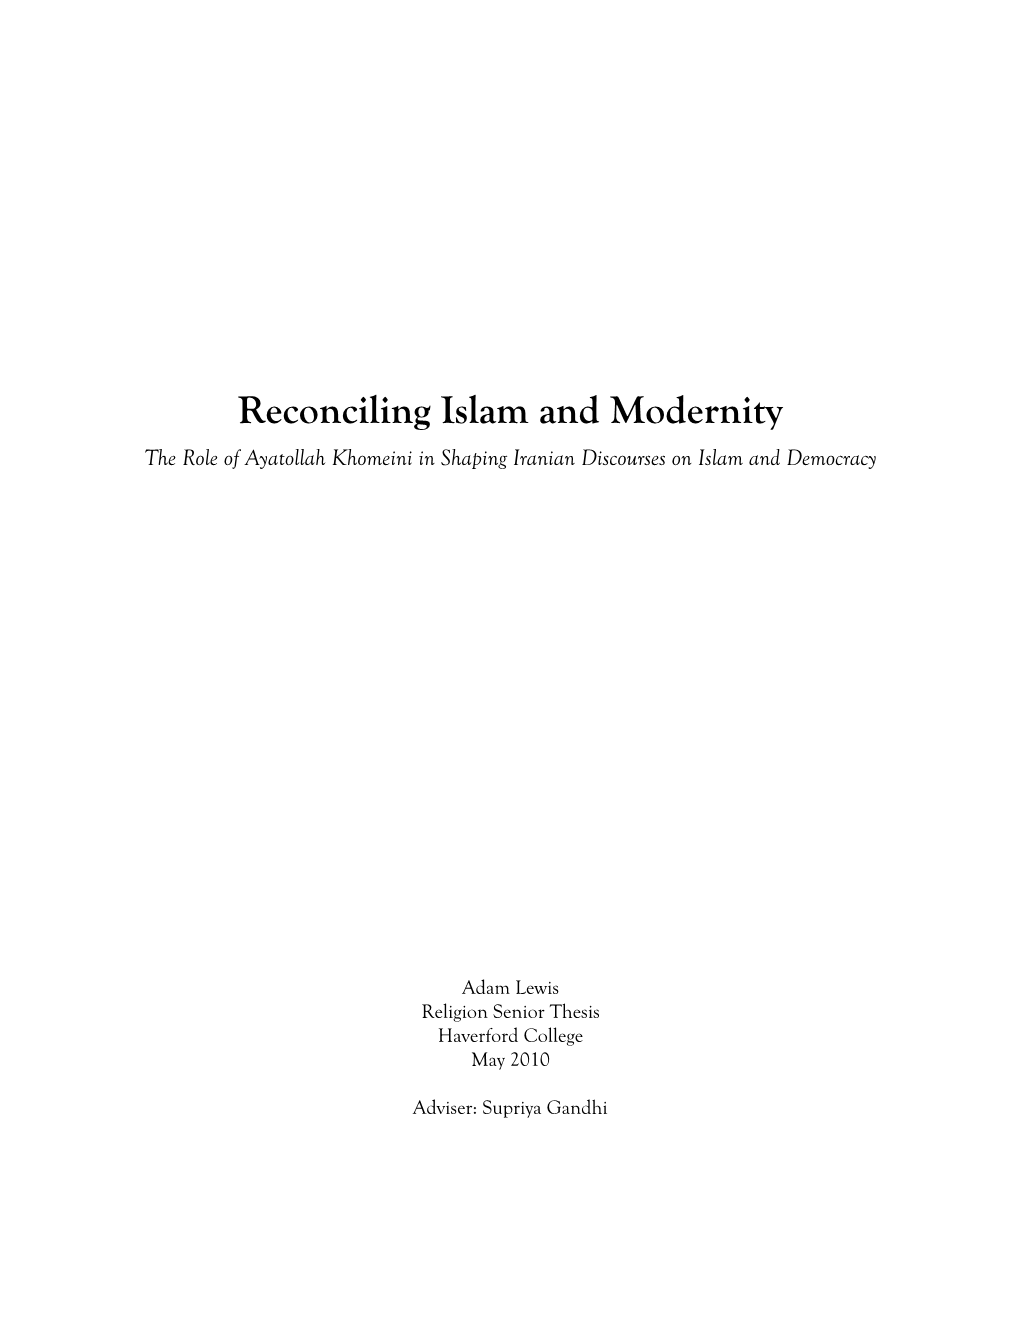 Reconciling Islam and Modernity the Role of Ayatollah Khomeini in Shaping Iranian Discourses on Islam and Democracy